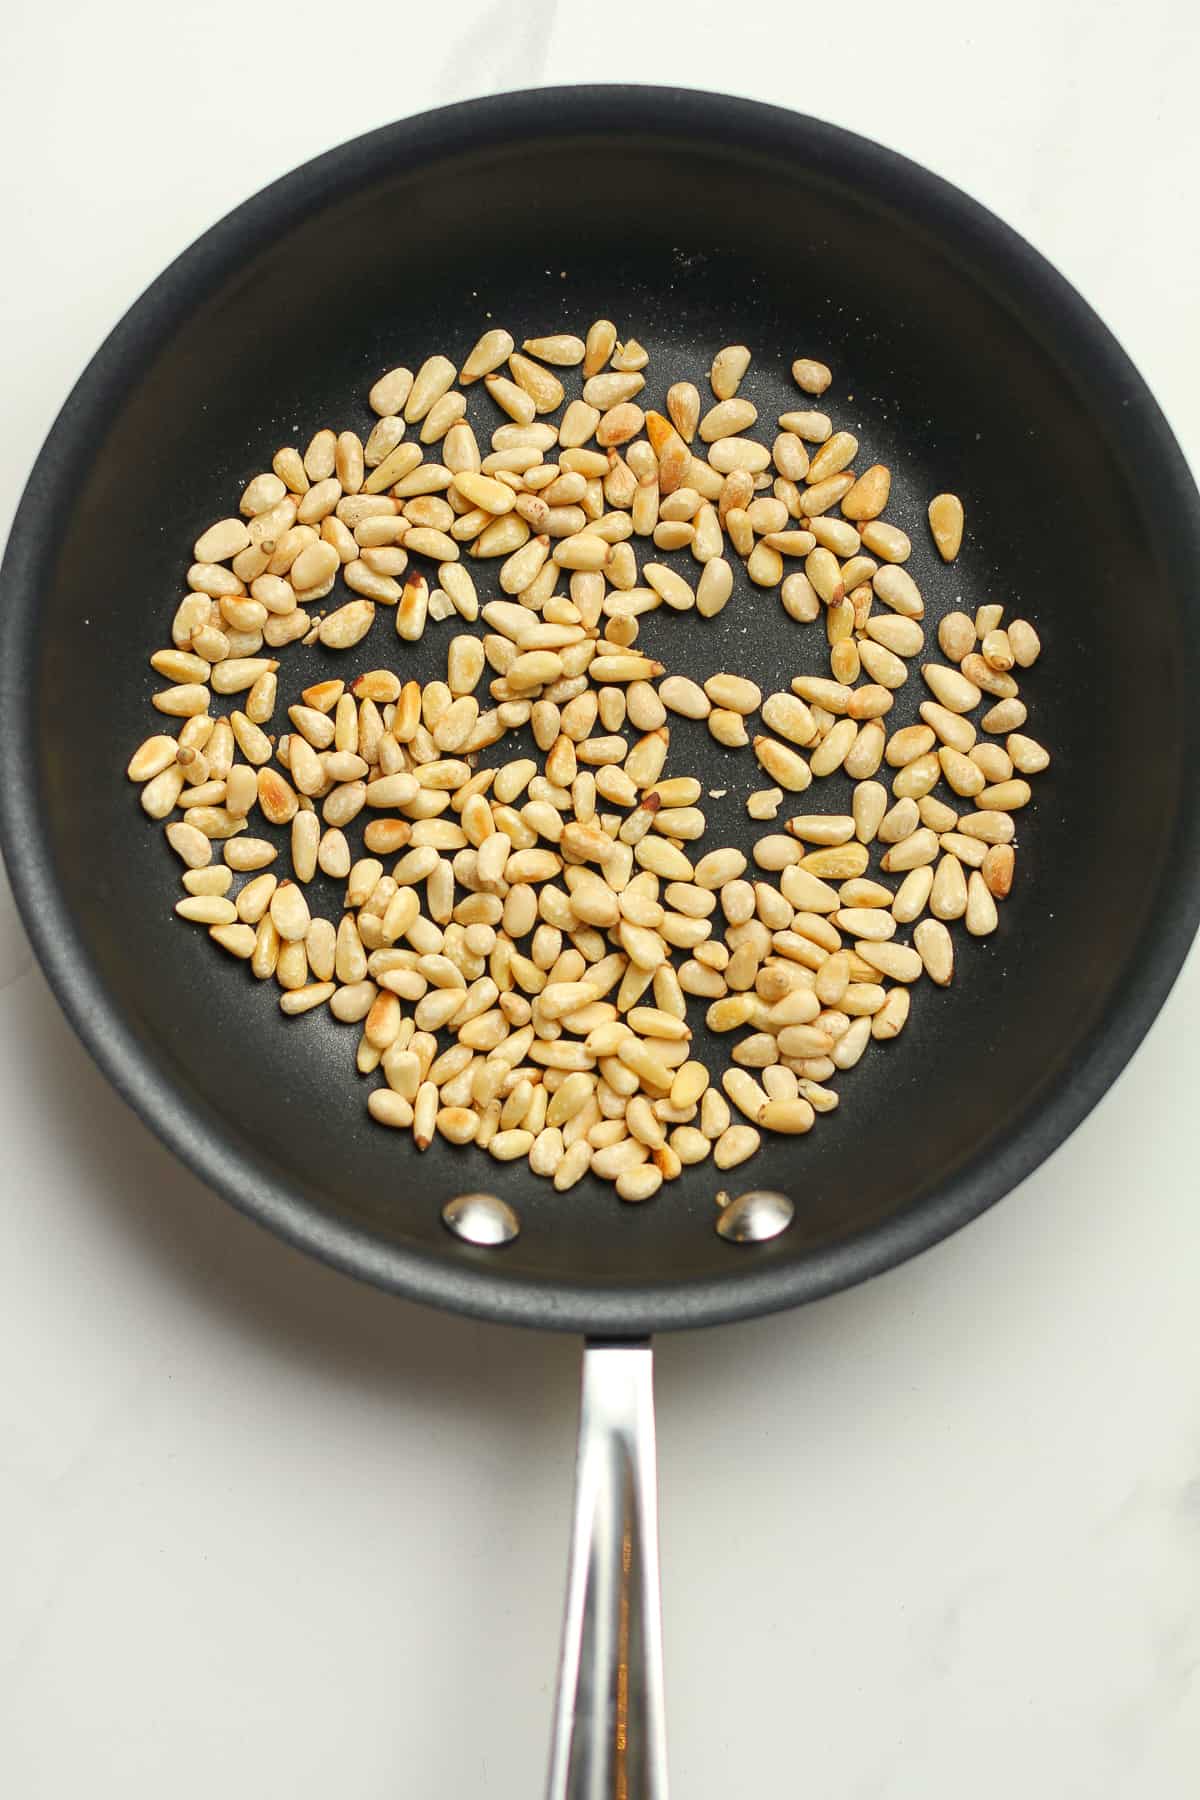 The toasted pine nuts in a pan.